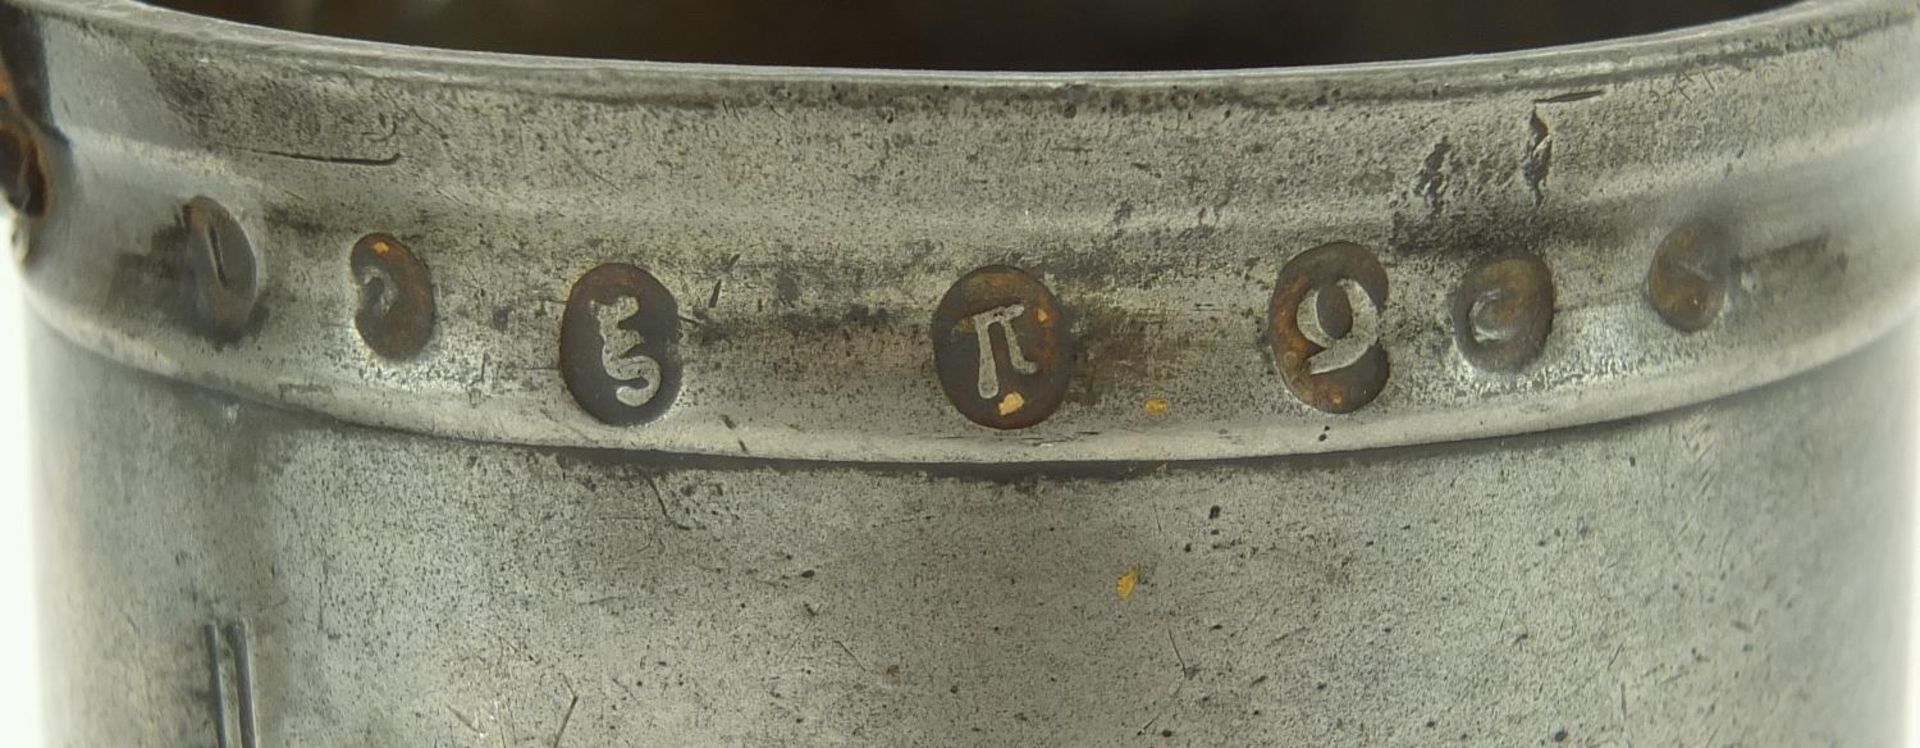 Graduated set of four antique pewter measures, indistinct maker's mark to each, possibly Dewitte - Image 3 of 6